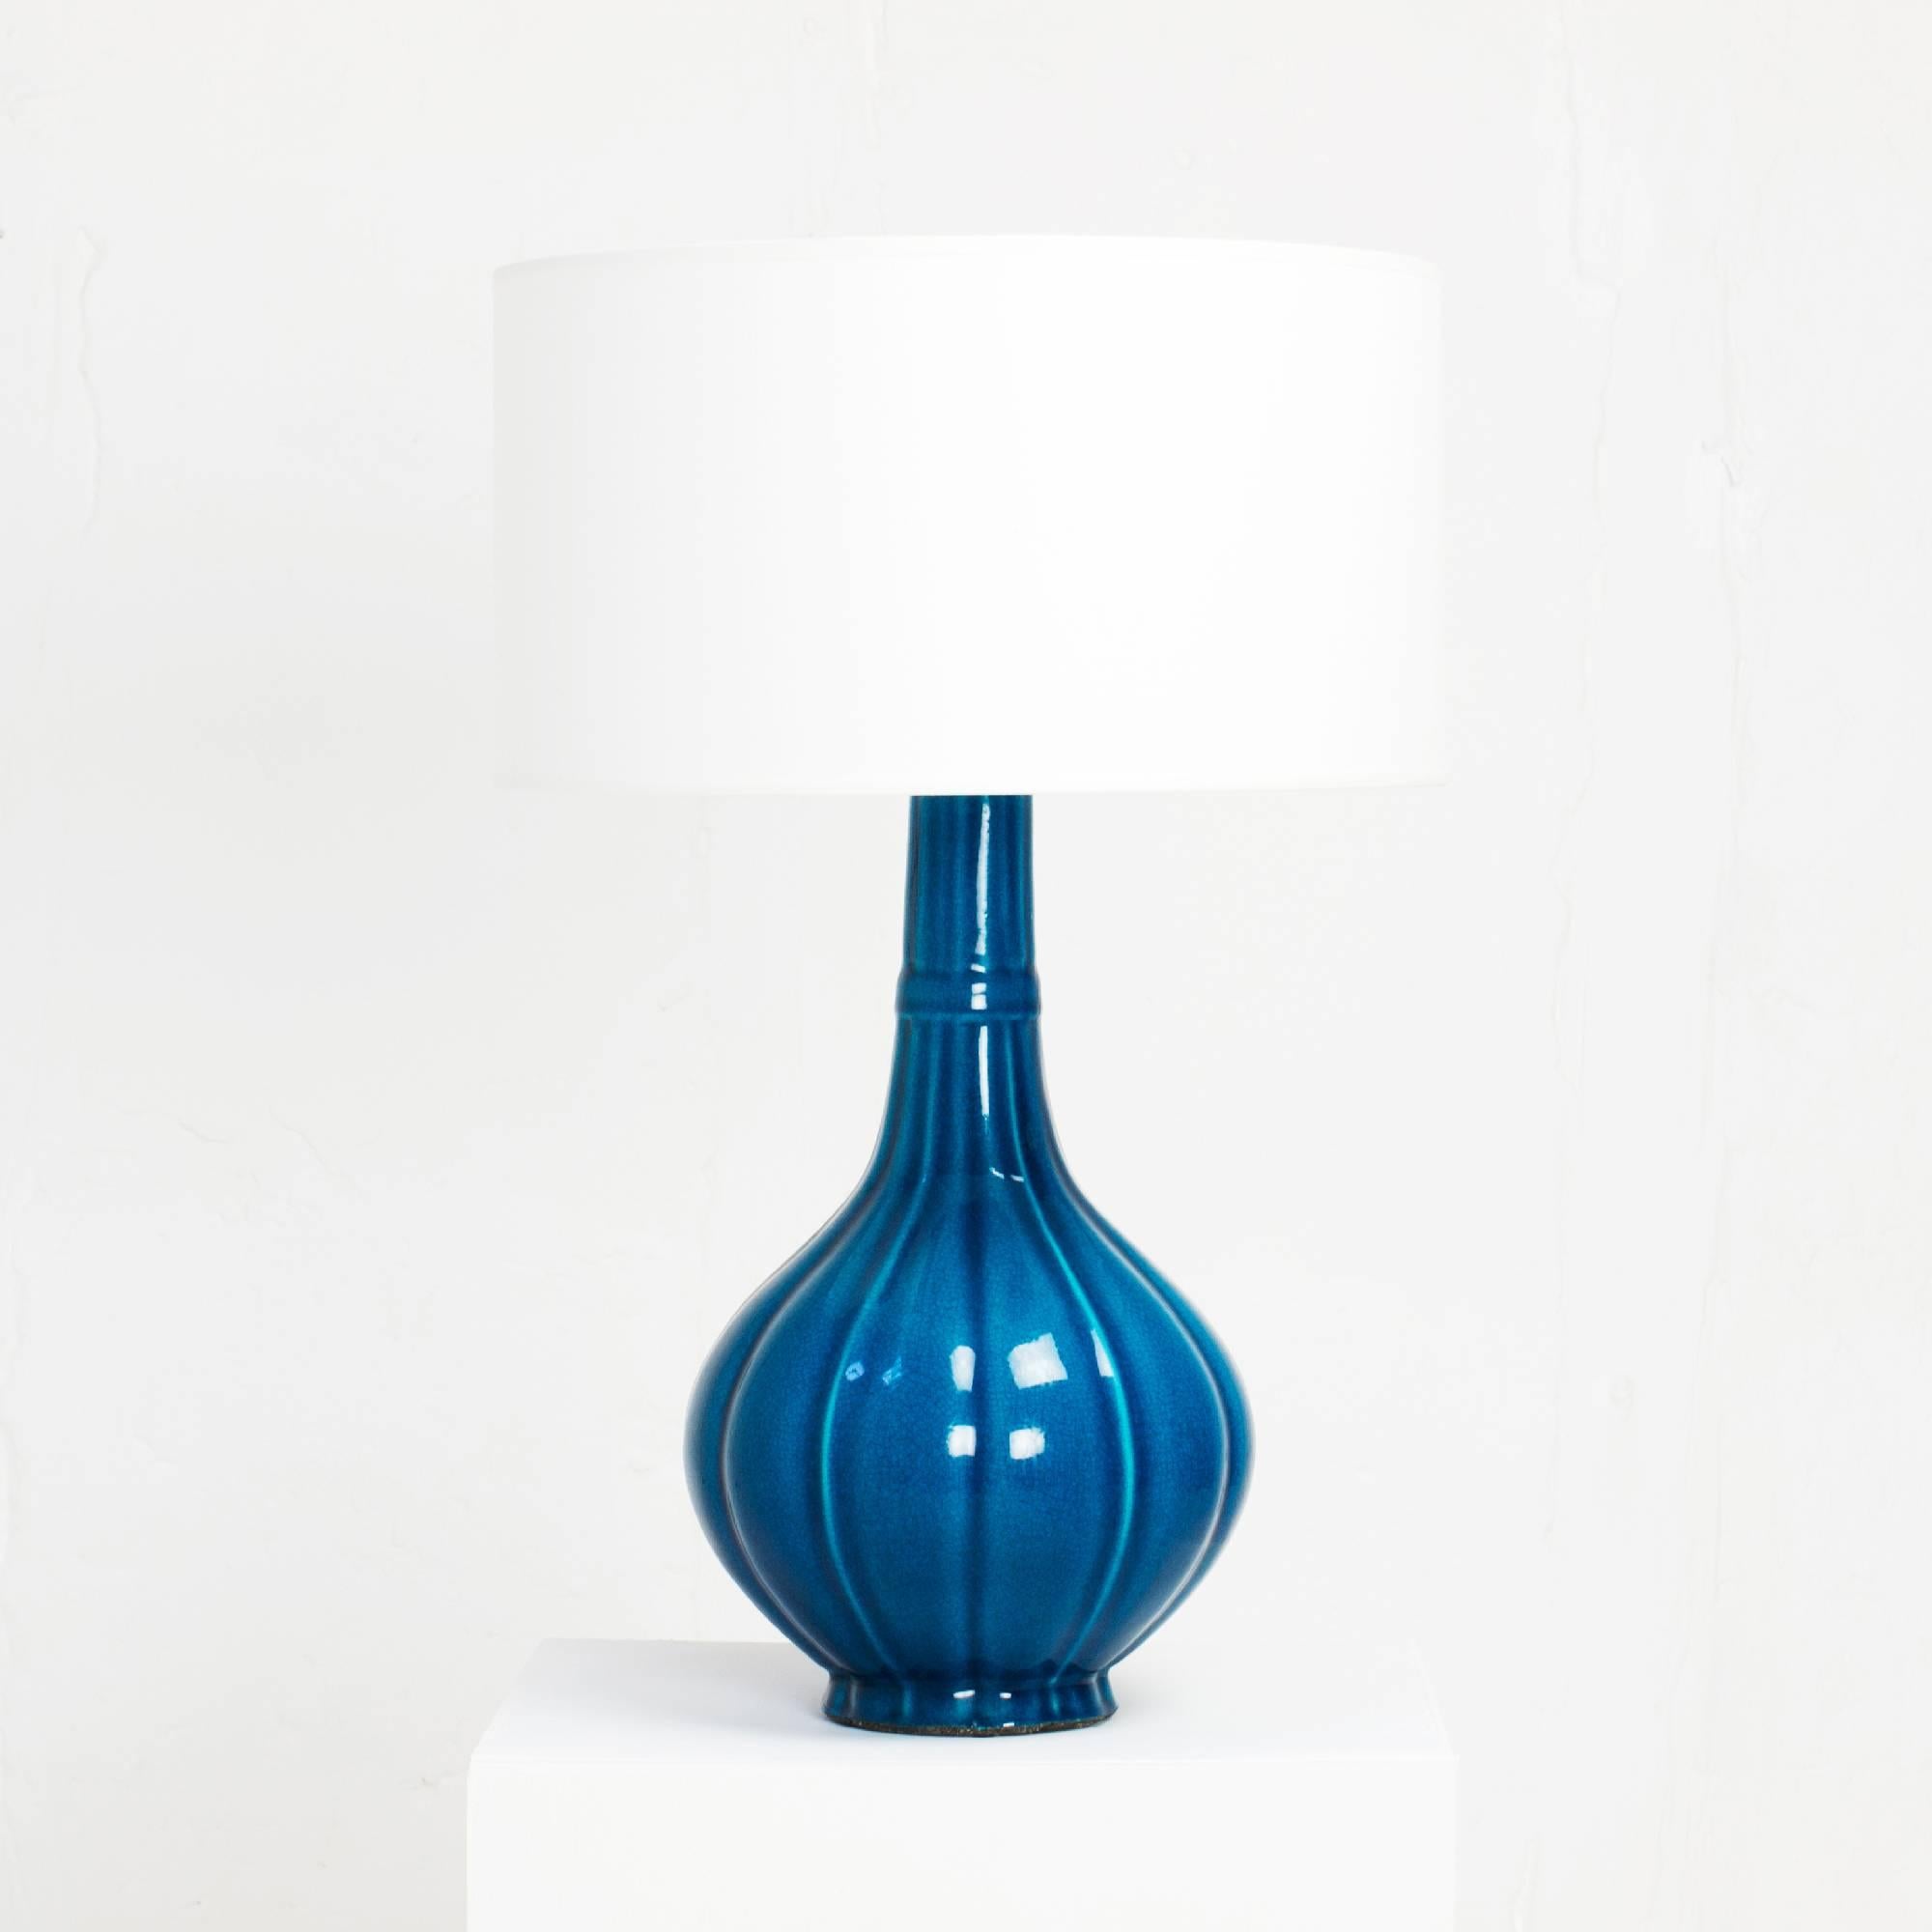 Blue crackle glaze ceramic table lamp by Pol Chambost from 1972 (dated and signed).